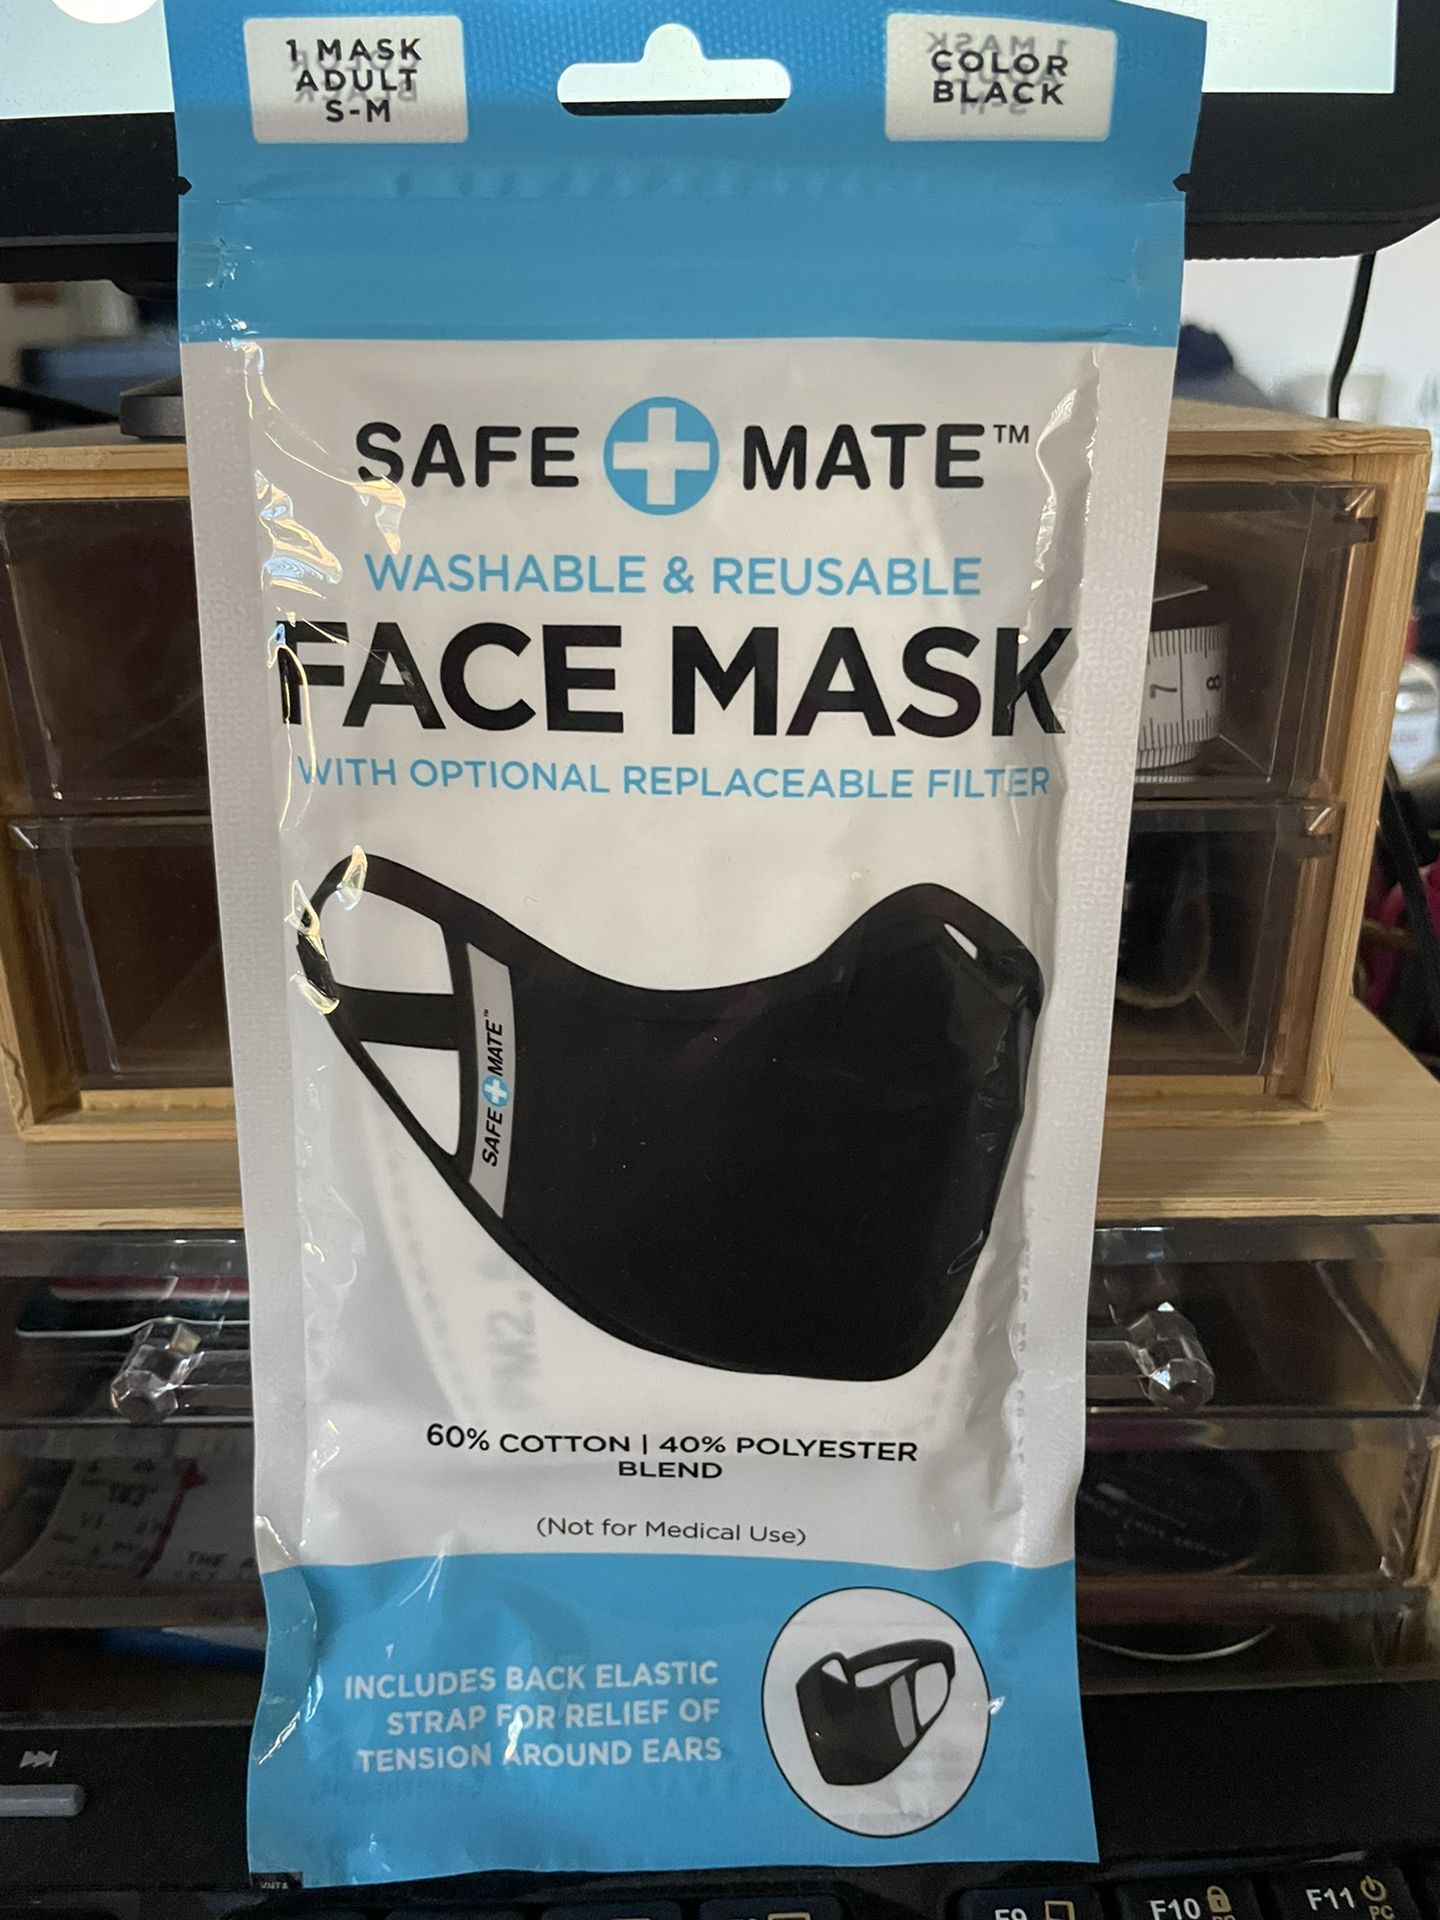 Safe+Mate Washable & Reusable Face Mask - Black - S/M (Not for Medical Use)